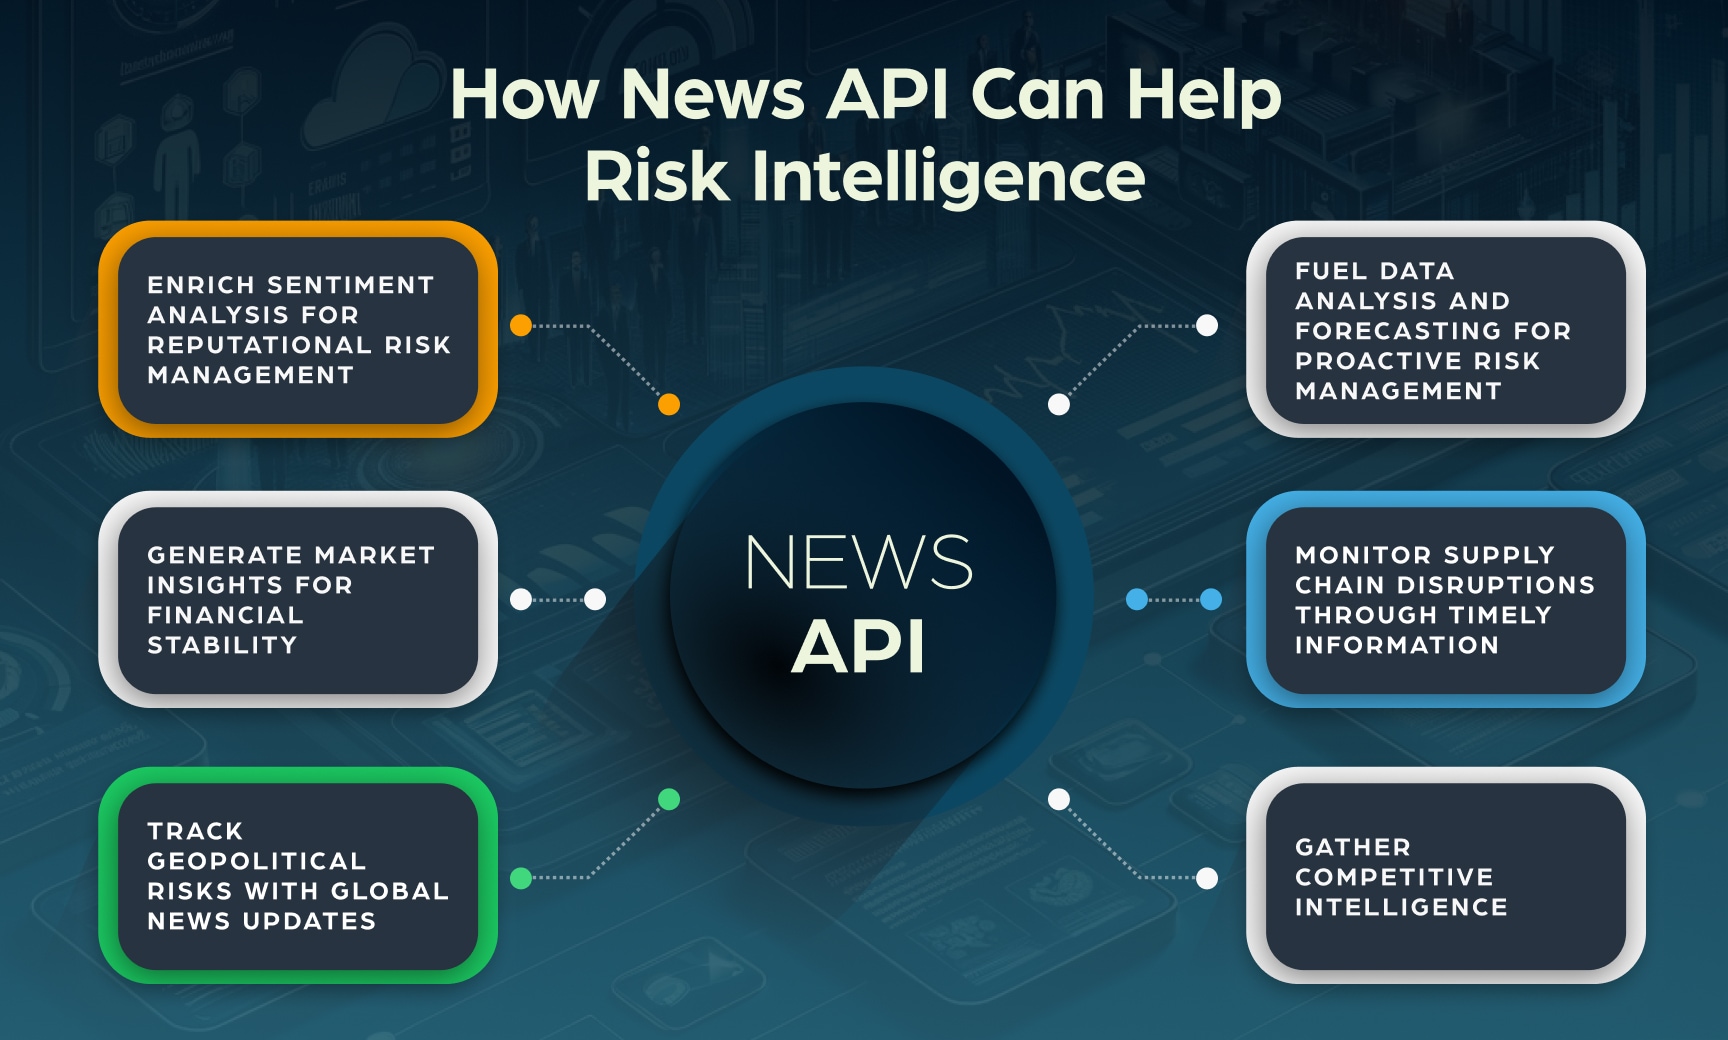 How News API can help risk intelligence